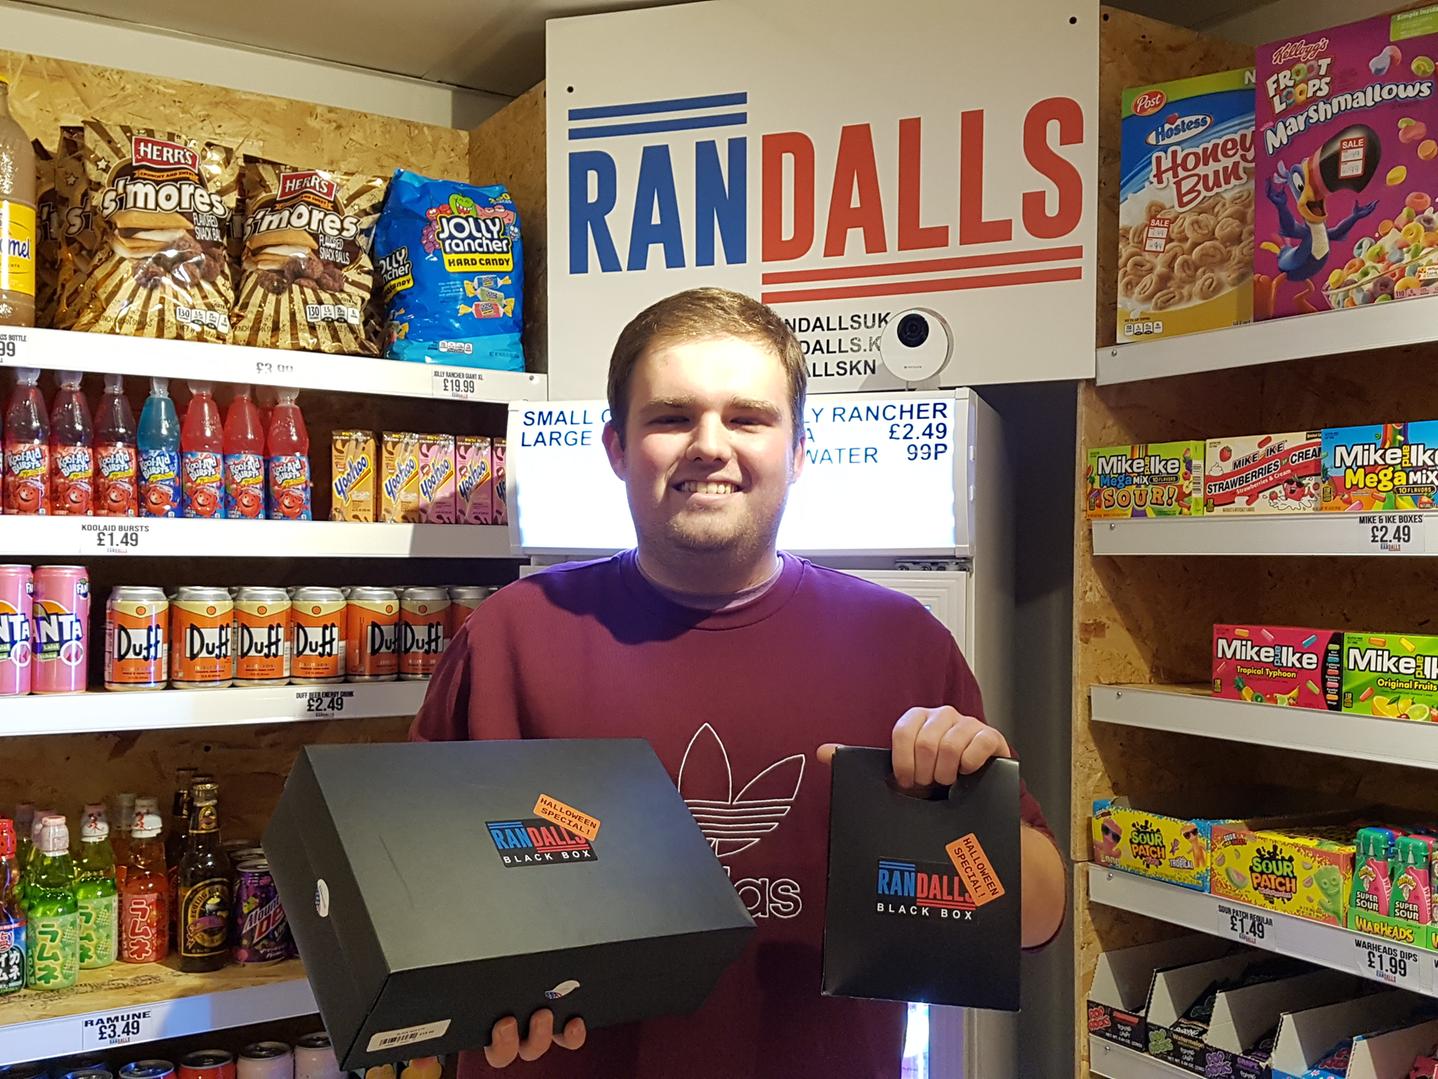 Jarrod runs Randalls in The Bean Hive, which stocks sweets, drinks, cereals and more from around the world. His mystery boxes with a Halloween were a hit and are expected to sell out very shortly. He said Christmas themed mystery boxes will launch in early November.